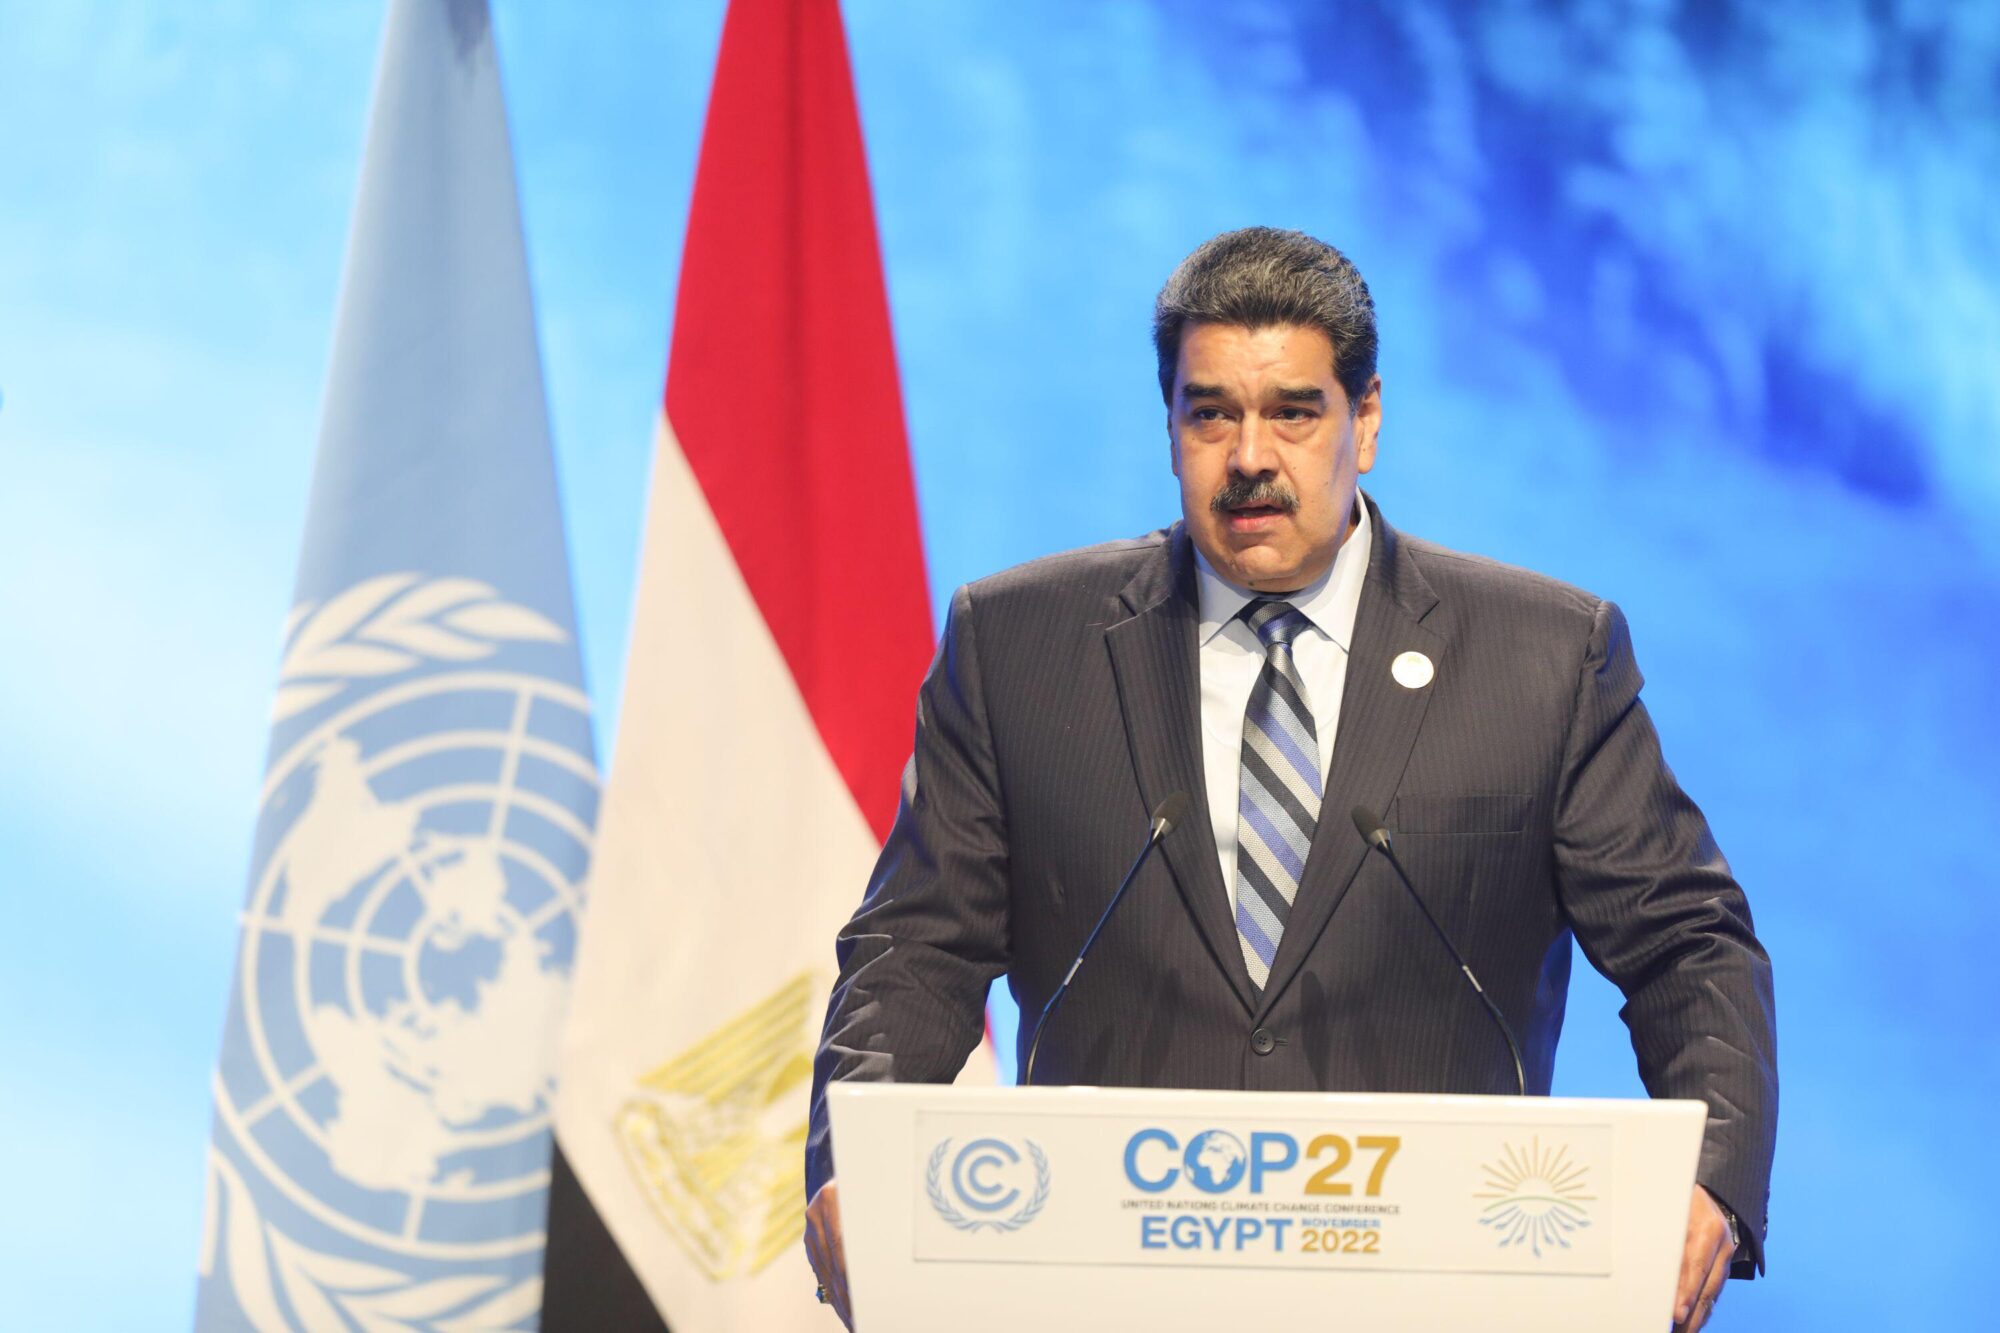 <p>Venezuelan president Nicolás Maduro delivers a speech at the COP27 summit in Egypt. He called on nations to “initiate a process of recovery” in the Amazon (Image: Prensa Miraflores / dpa / Alamy)</p>